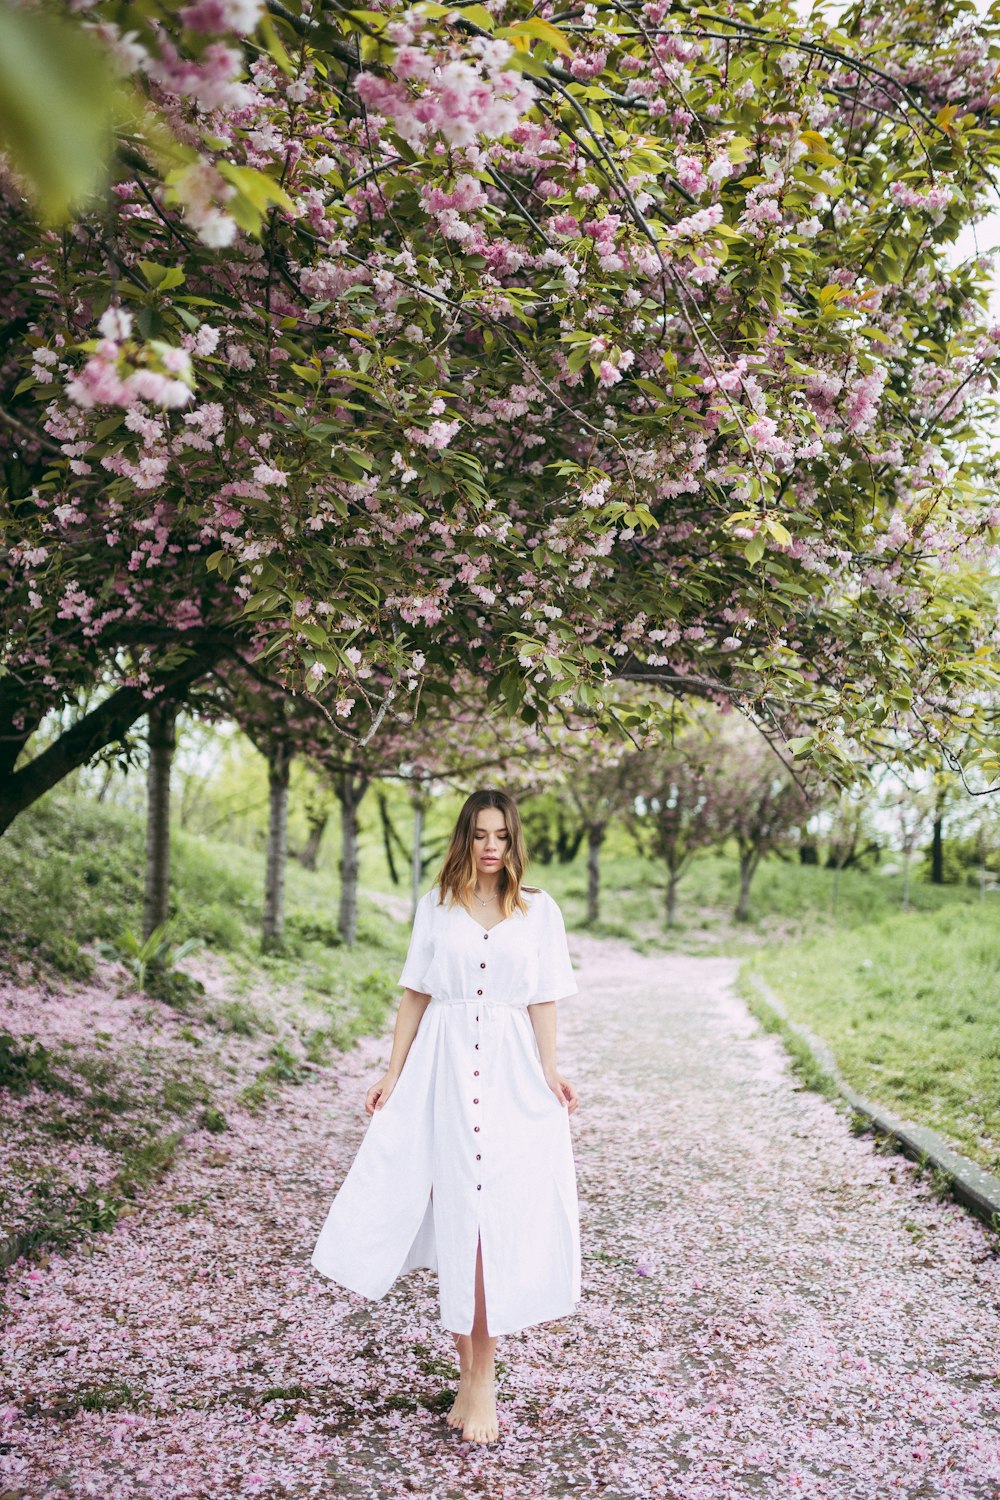 woman in white dress standing on trail under cherry blossom tree